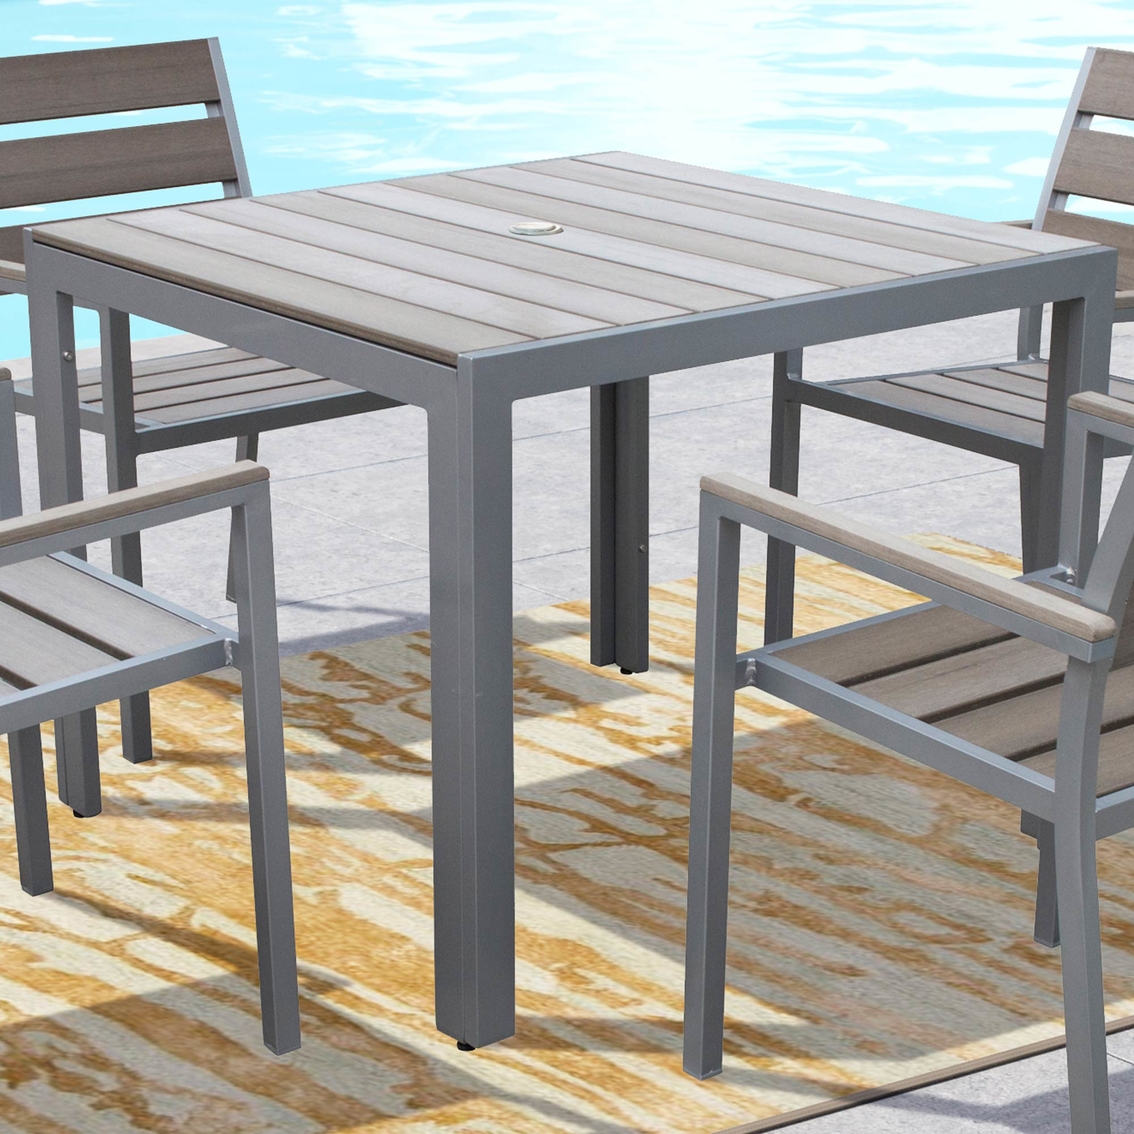 CorLiving Gallant Square Outdoor Dining Table - Image 3 of 6